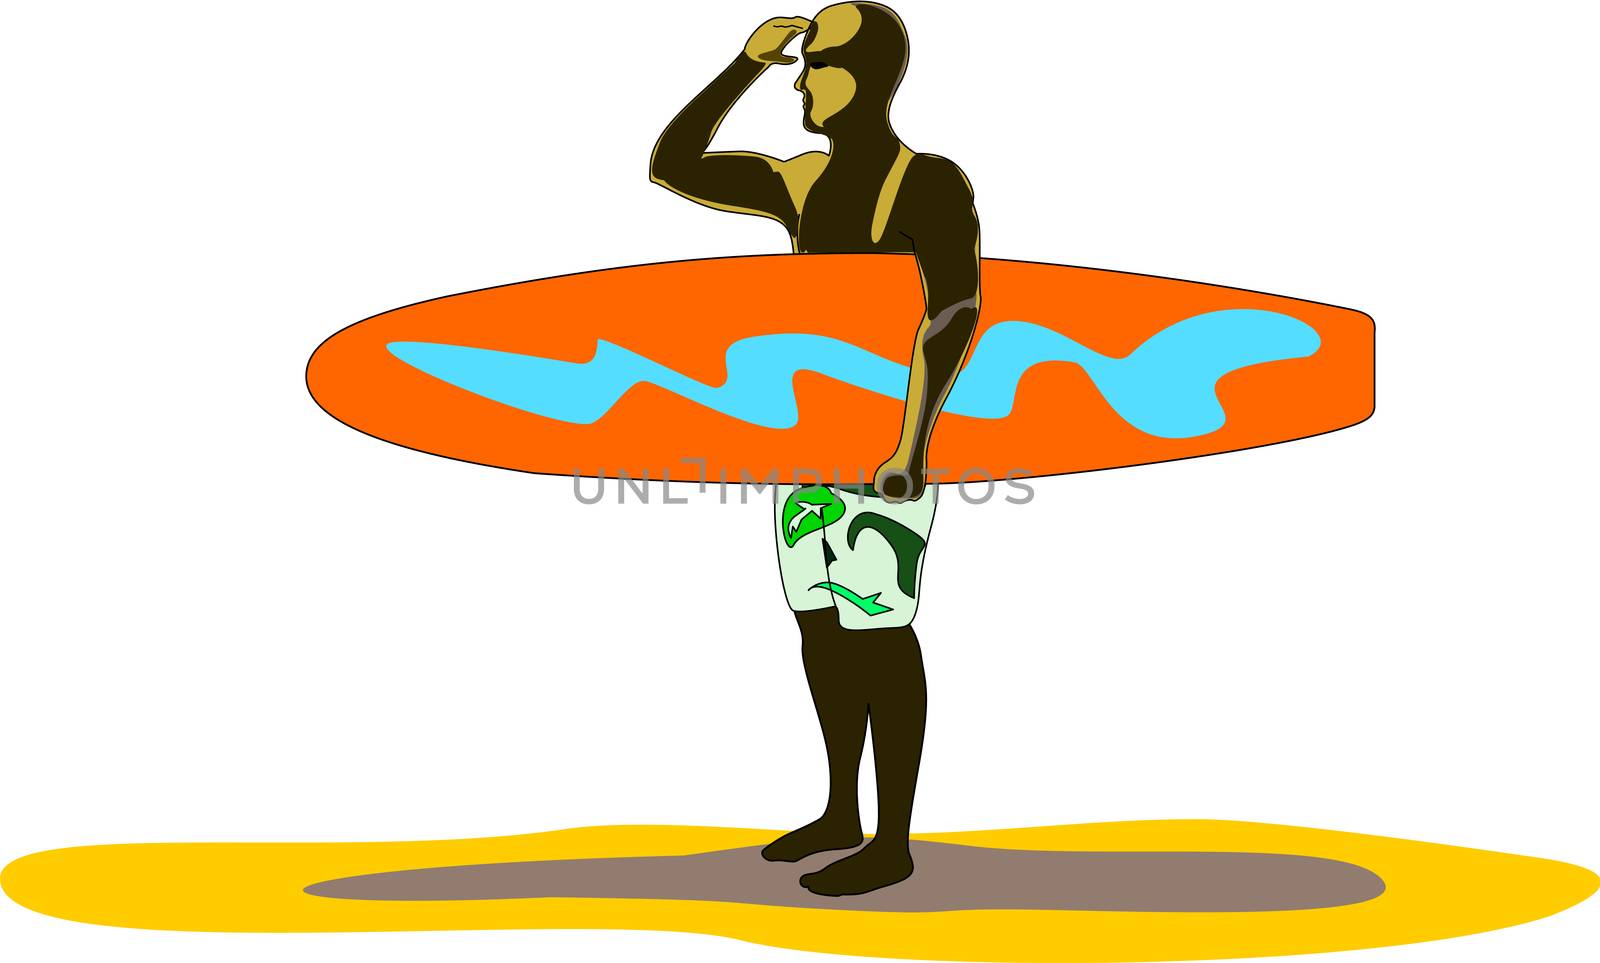 Surfboarder Looks For Waves by trrent